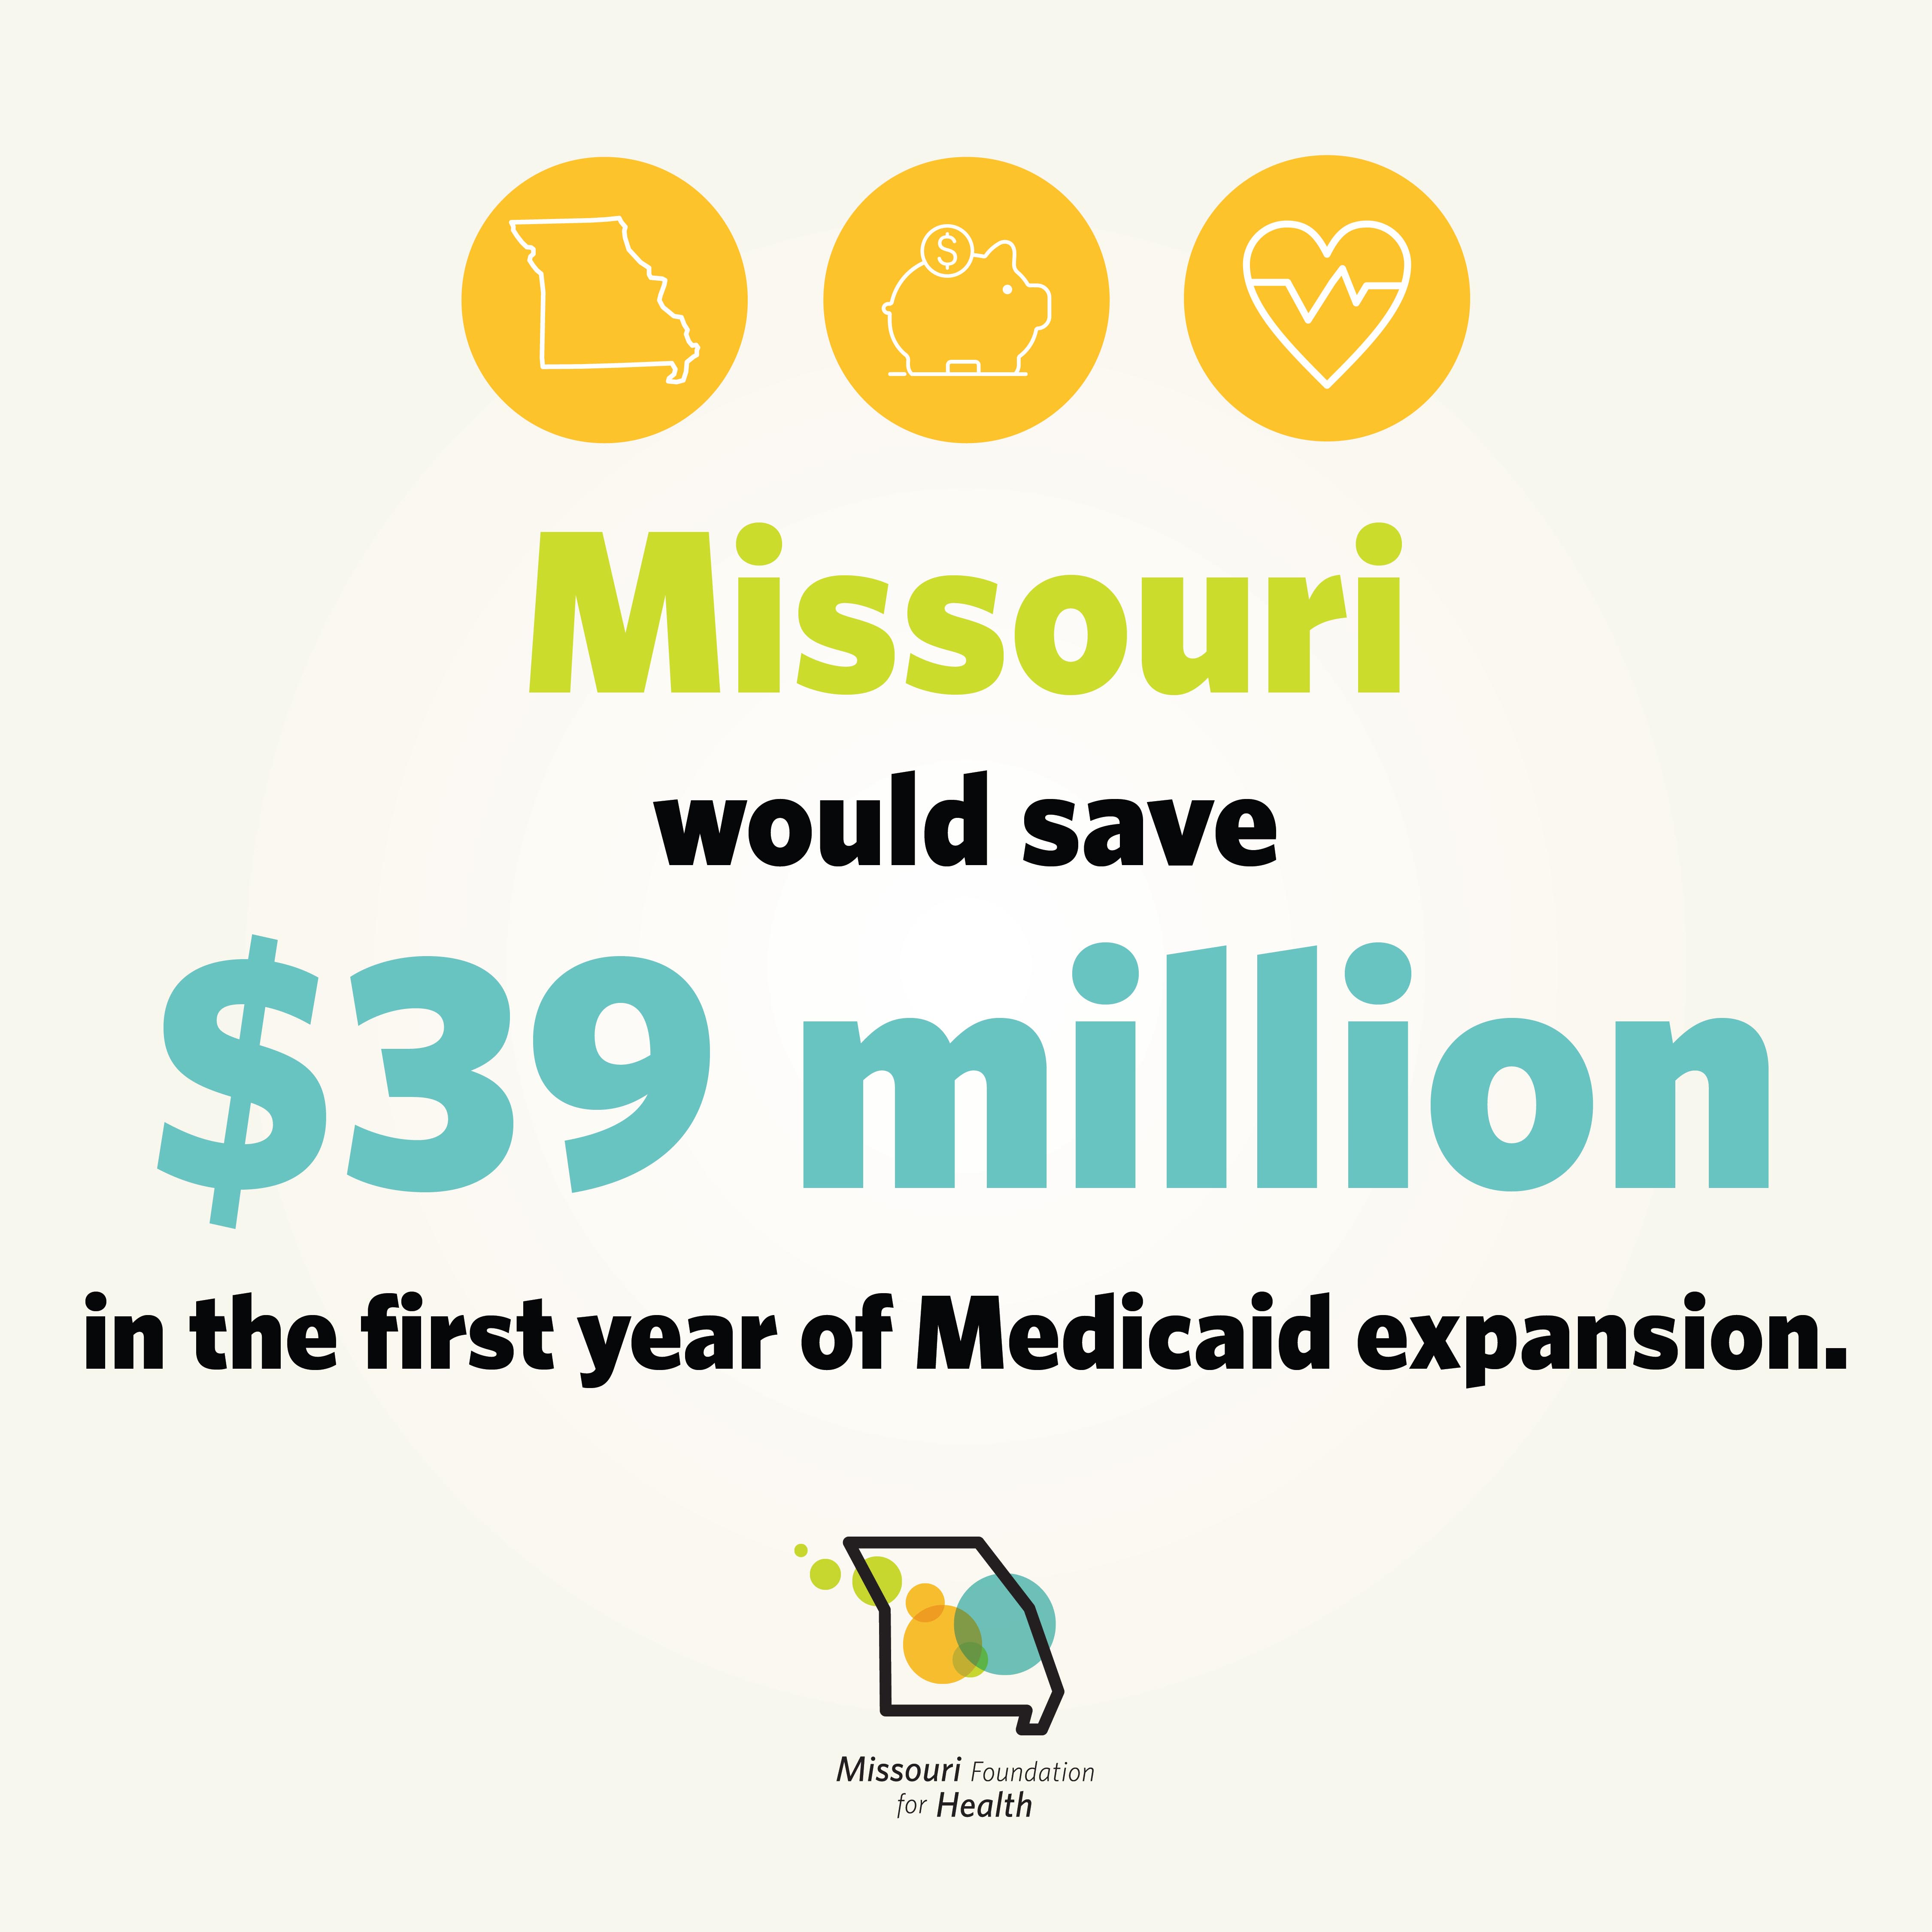 Graphic with icons of Missouri state, piggy bank, and heart with heartbeat and text below that states Missouri would save $39 million in the first year of Medicaid expansion. with the Missouri Foundation for Health logo.